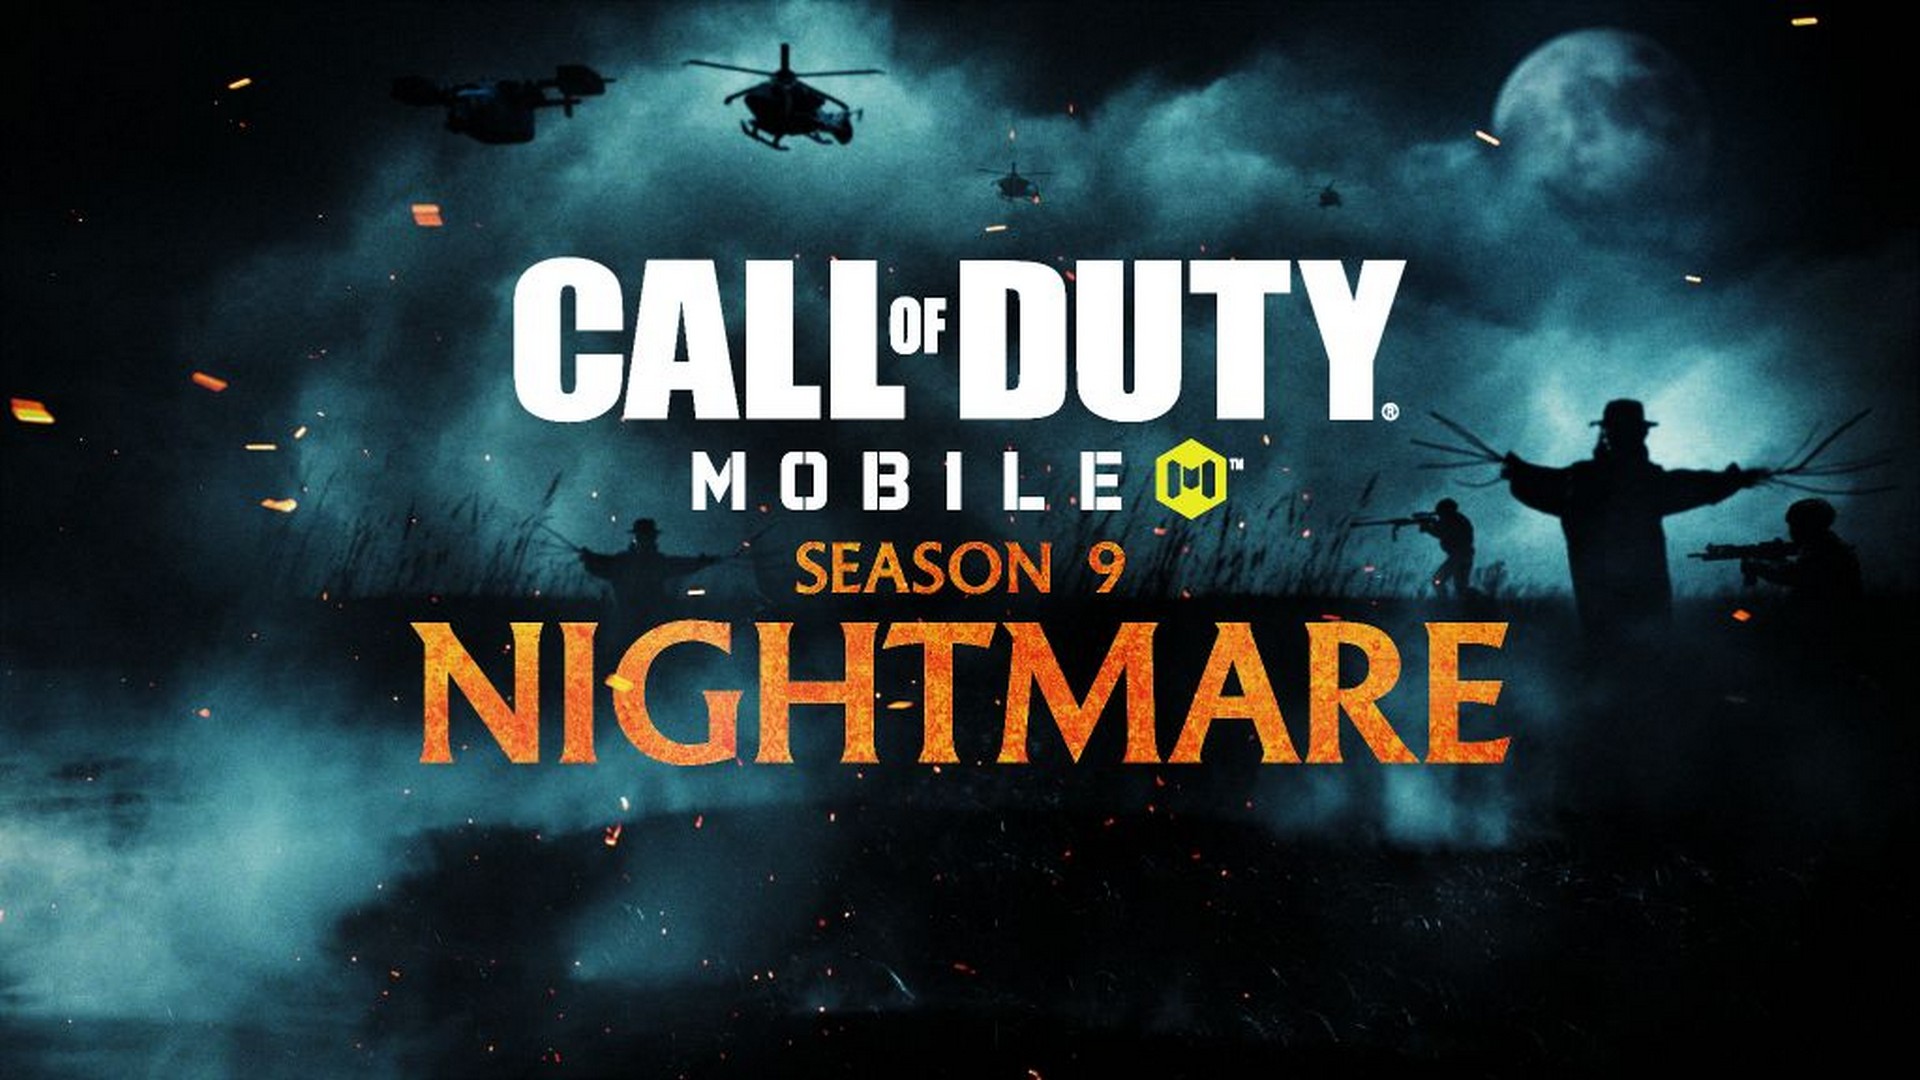 Undead Siege Returns to Call of Duty: Mobile In Season 9: Nightmare